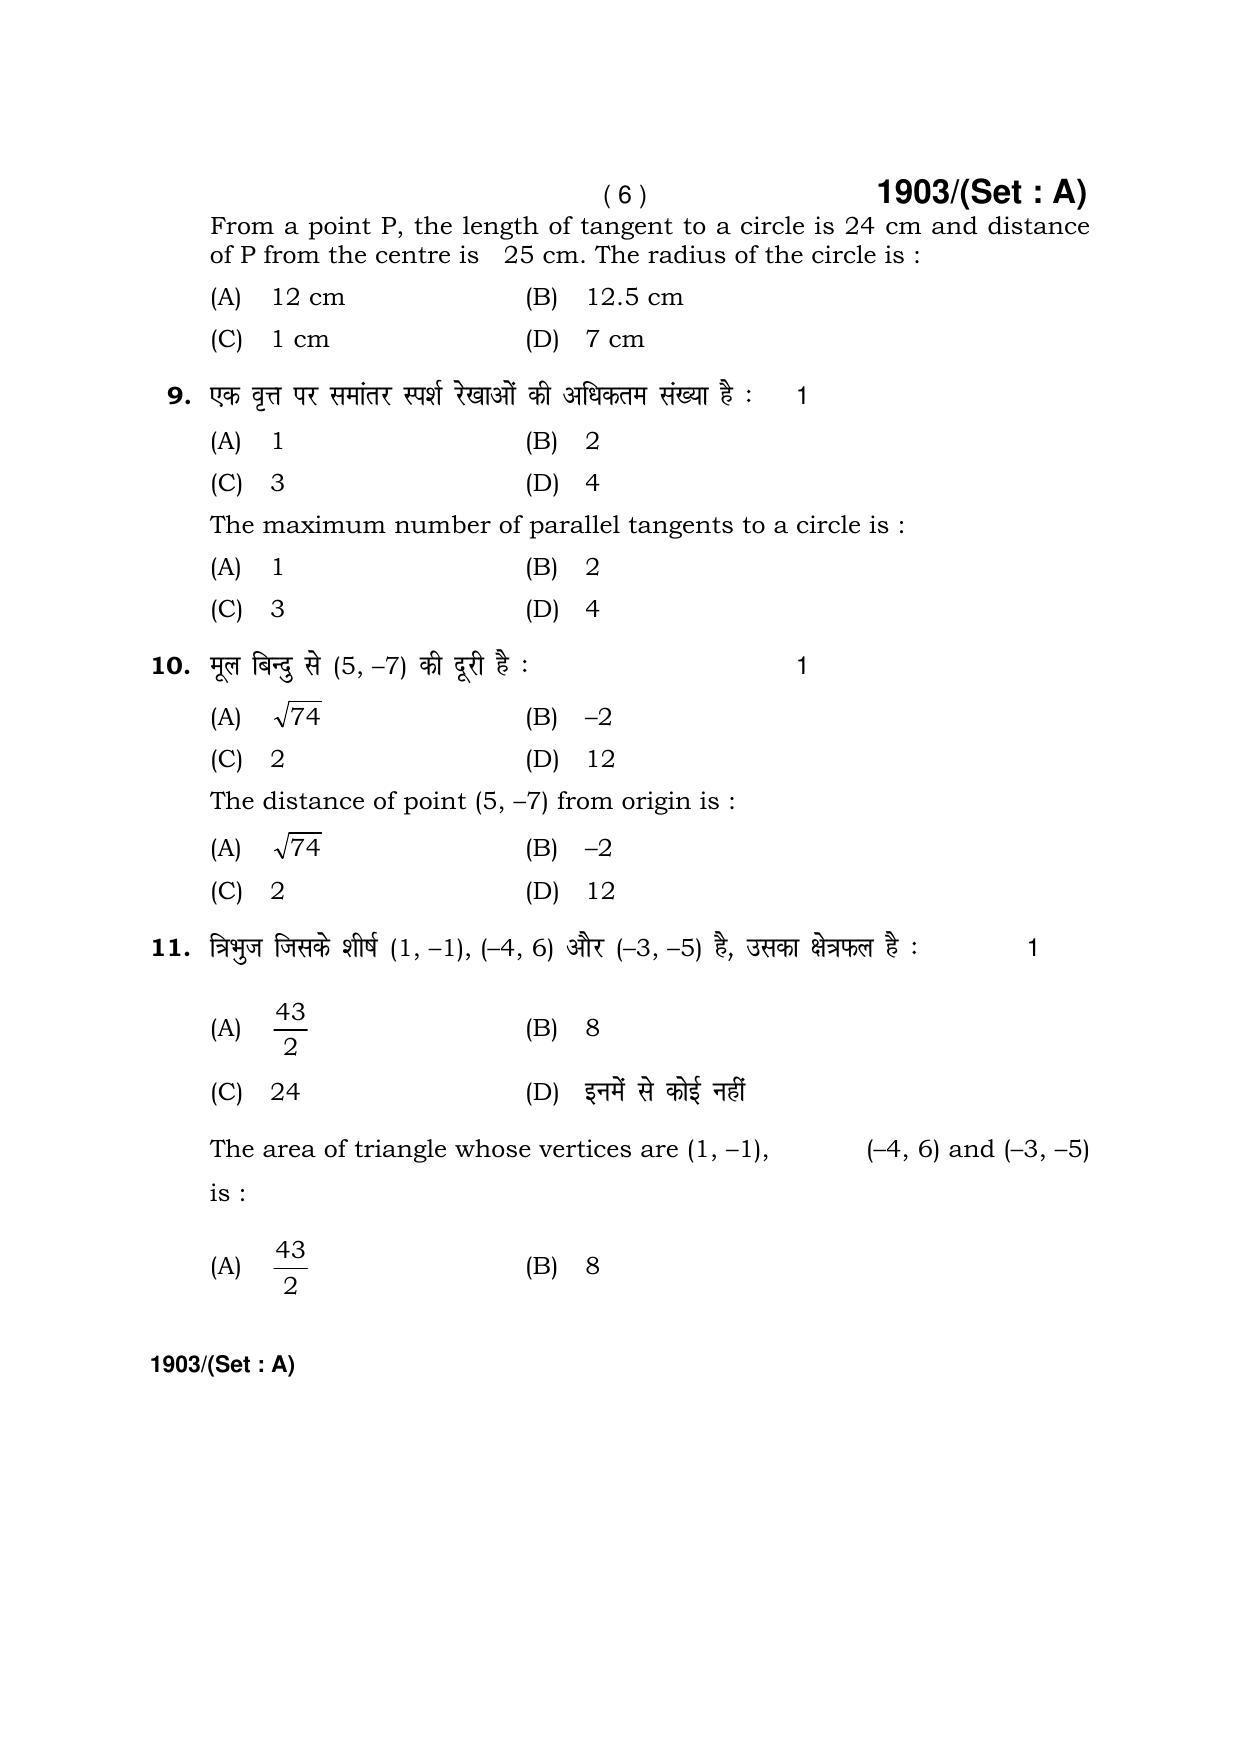 Haryana Board HBSE Class 10 Mathematics -A 2017 Question Paper - Page 6